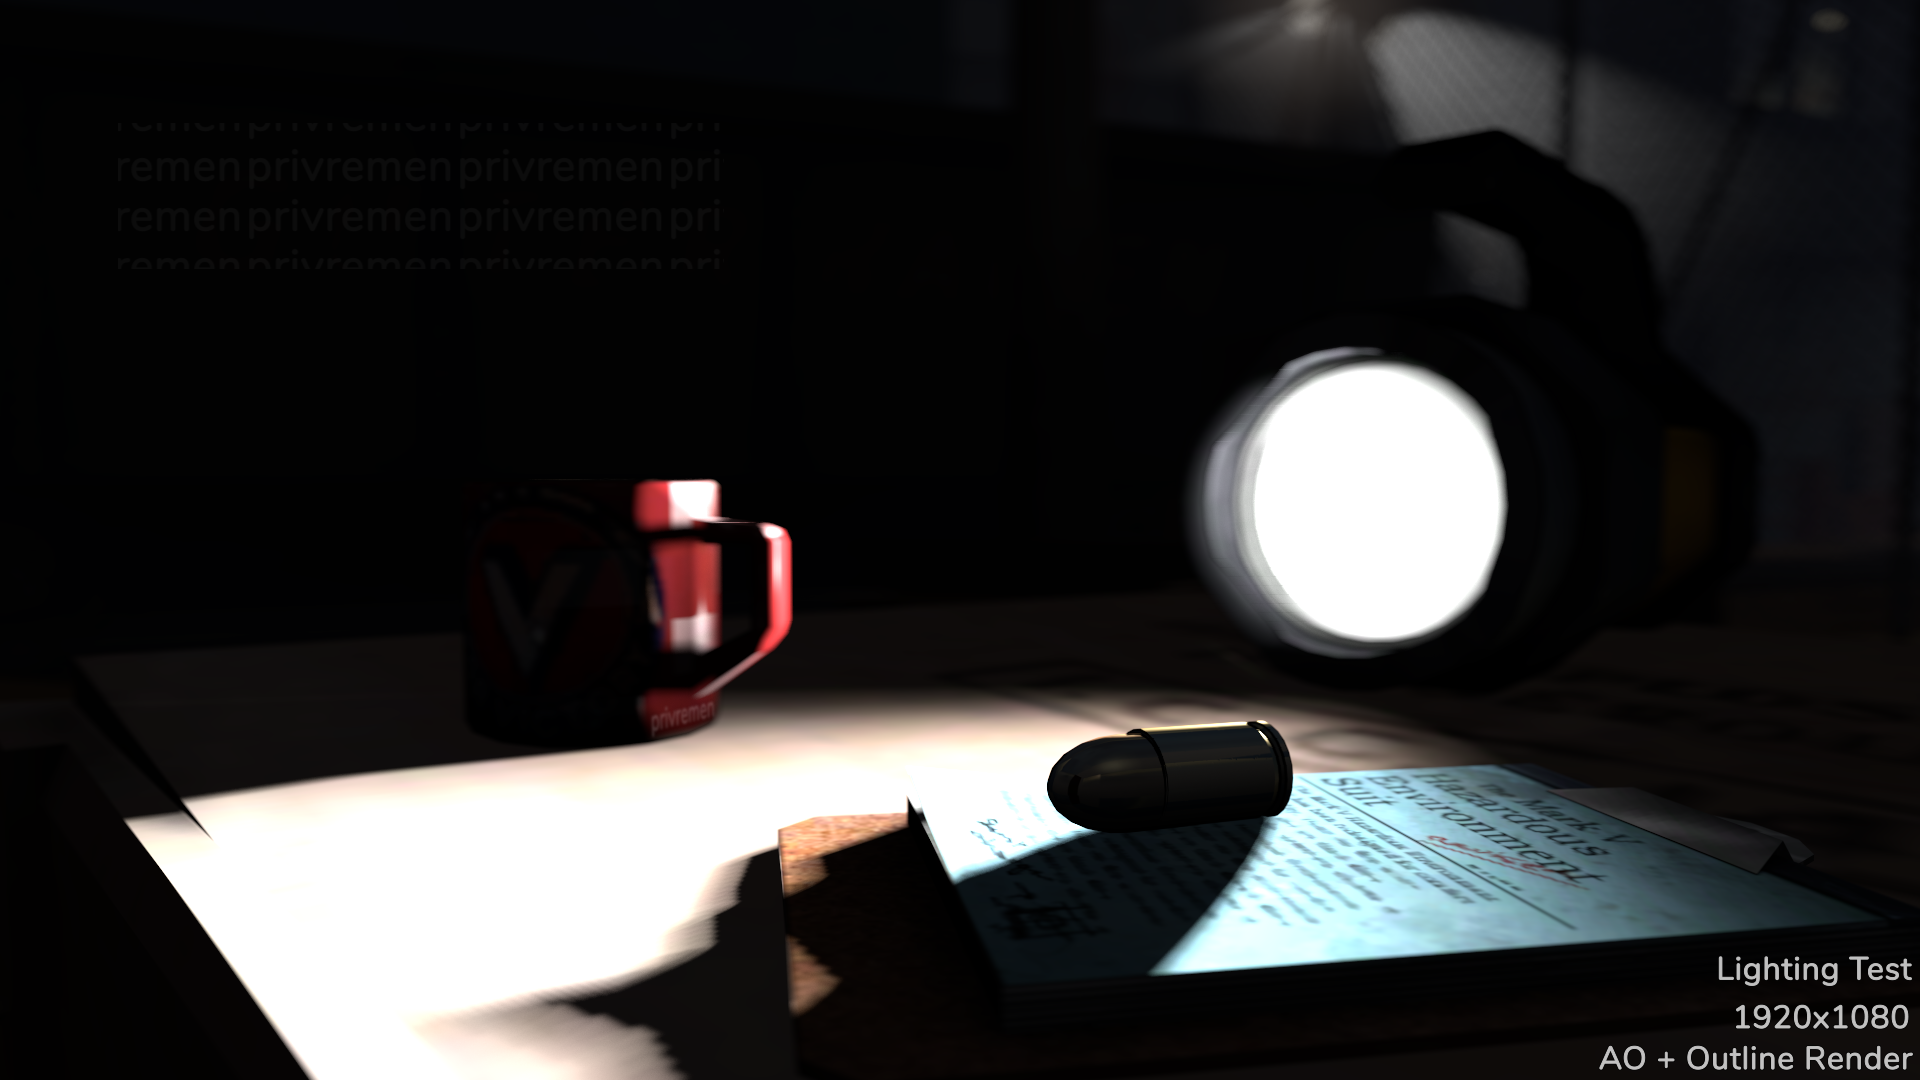 Flashlight Scene (Ambient Occlusion + Outline)